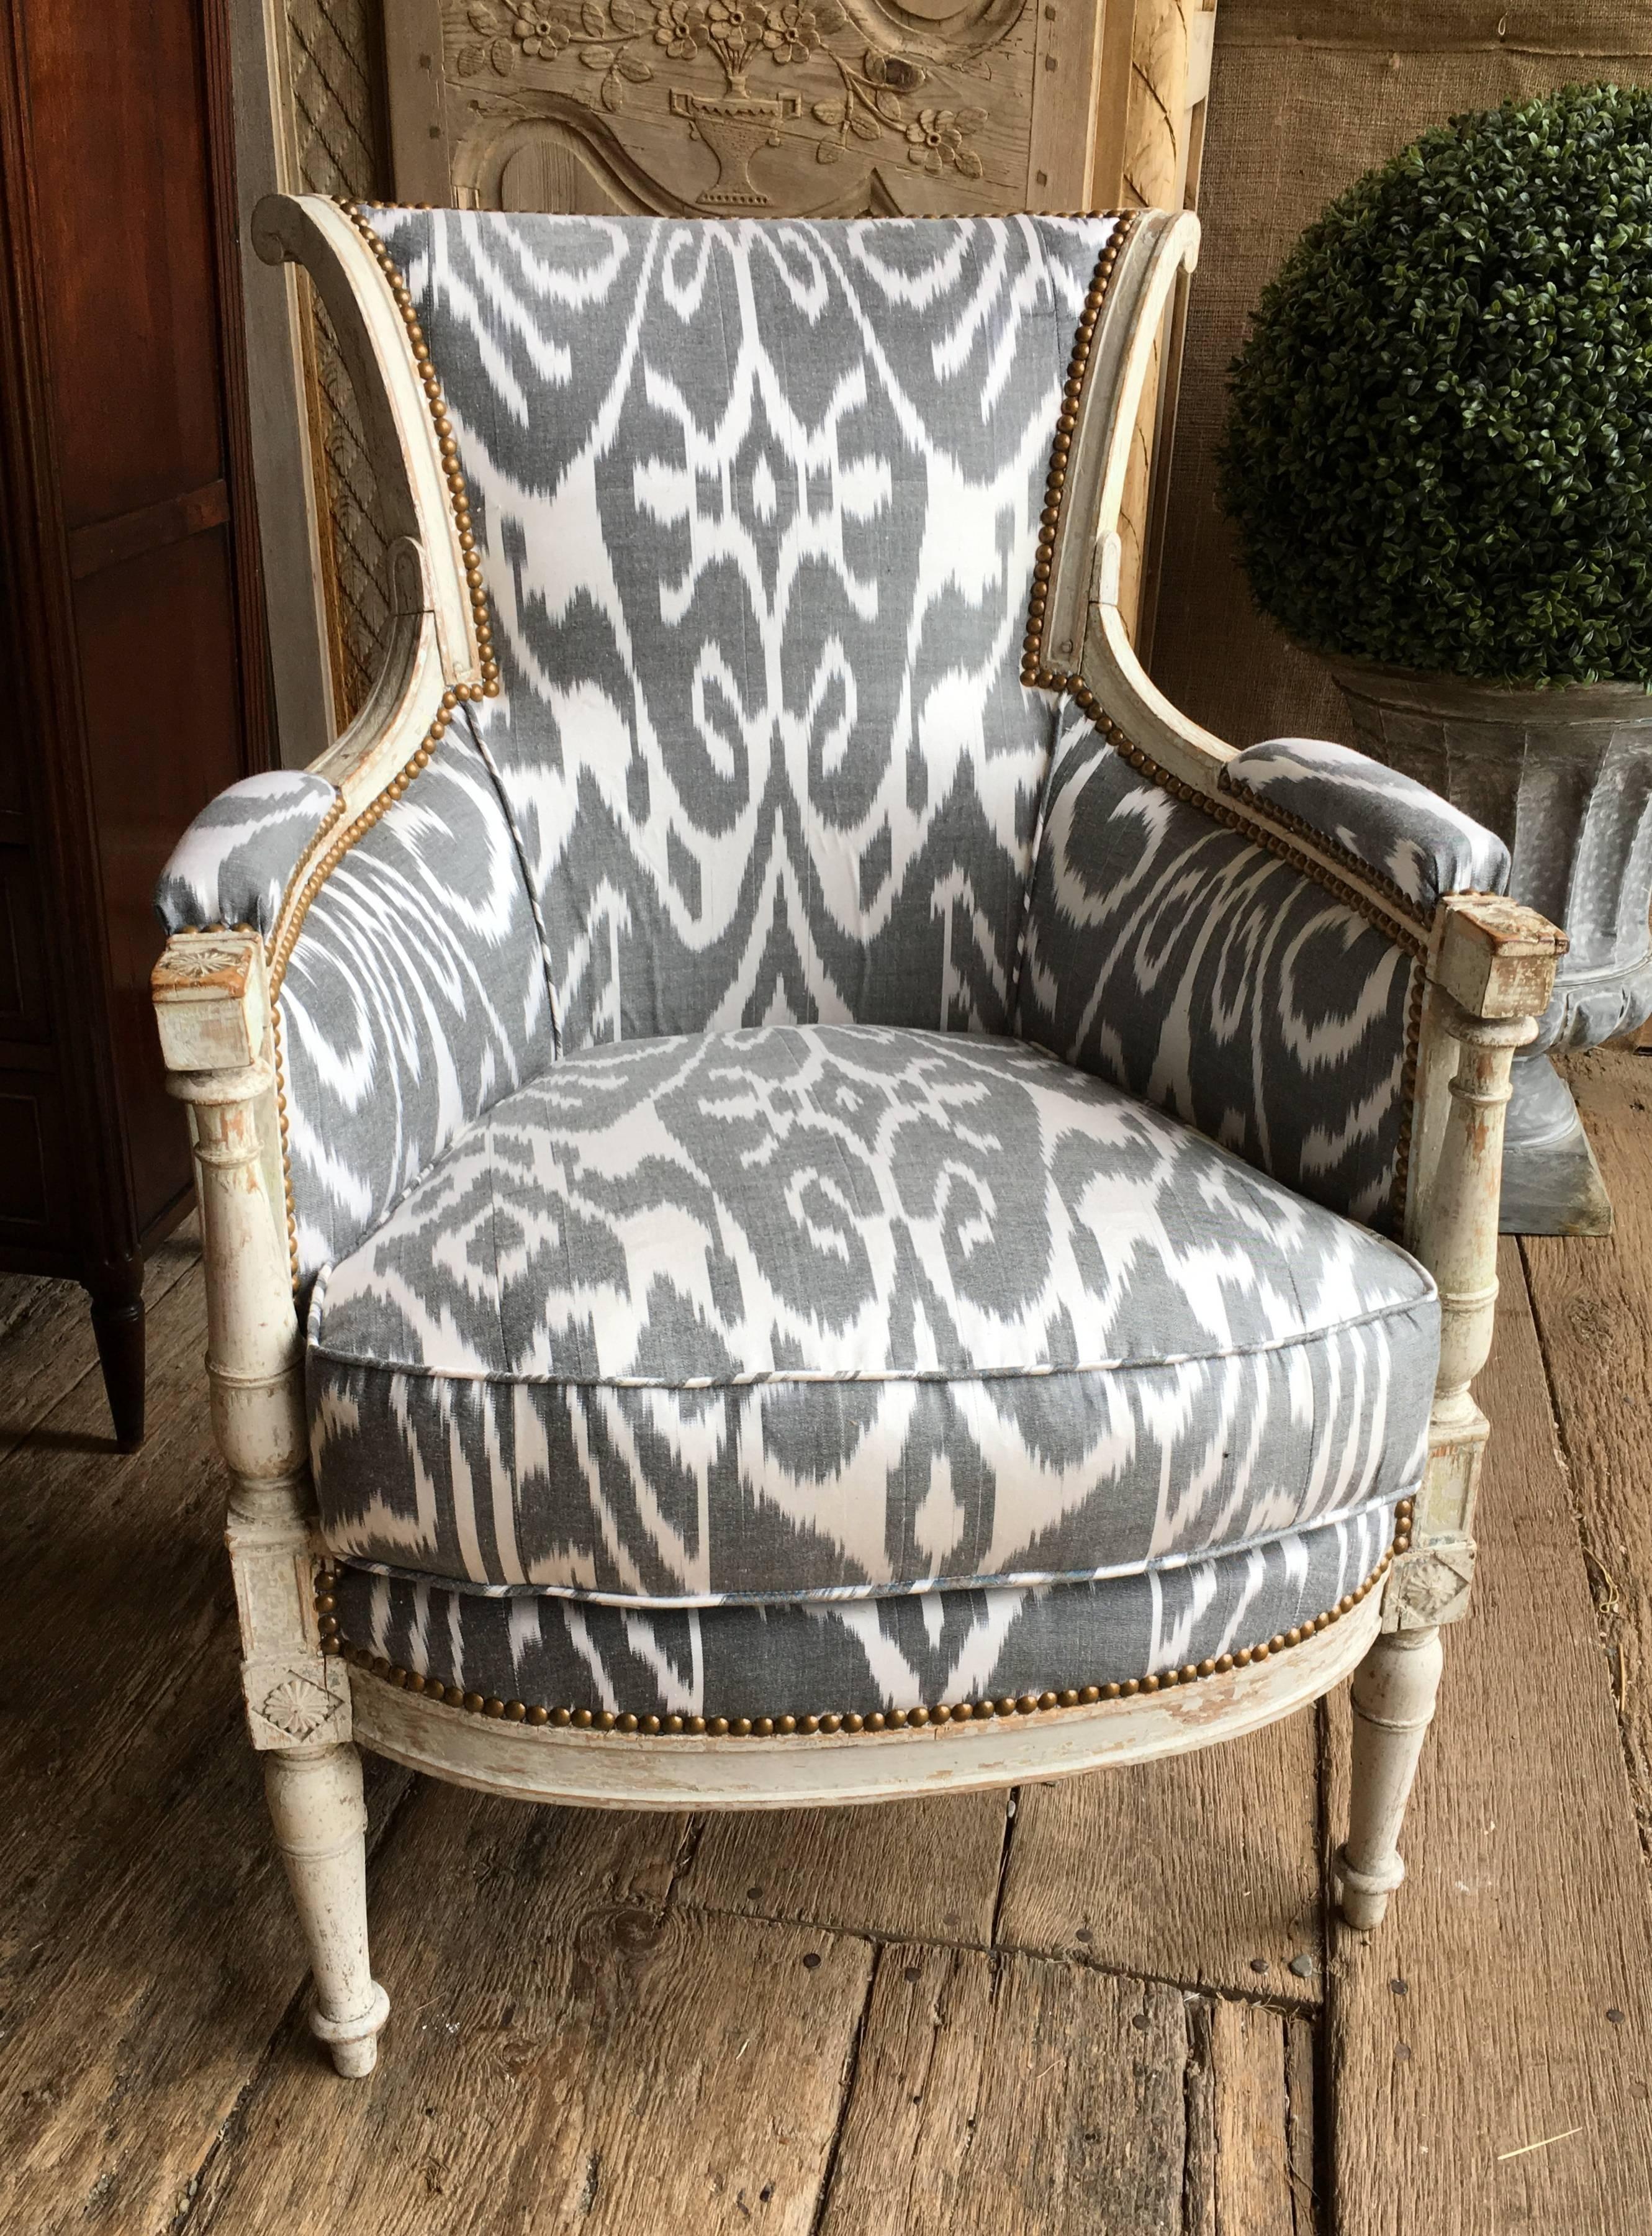 An early 19th century Directoire period bergere chair in beech, retaining its original painted finish, newly upholstered in black and white Ikat fabric.
Measures: Seat height 18.5